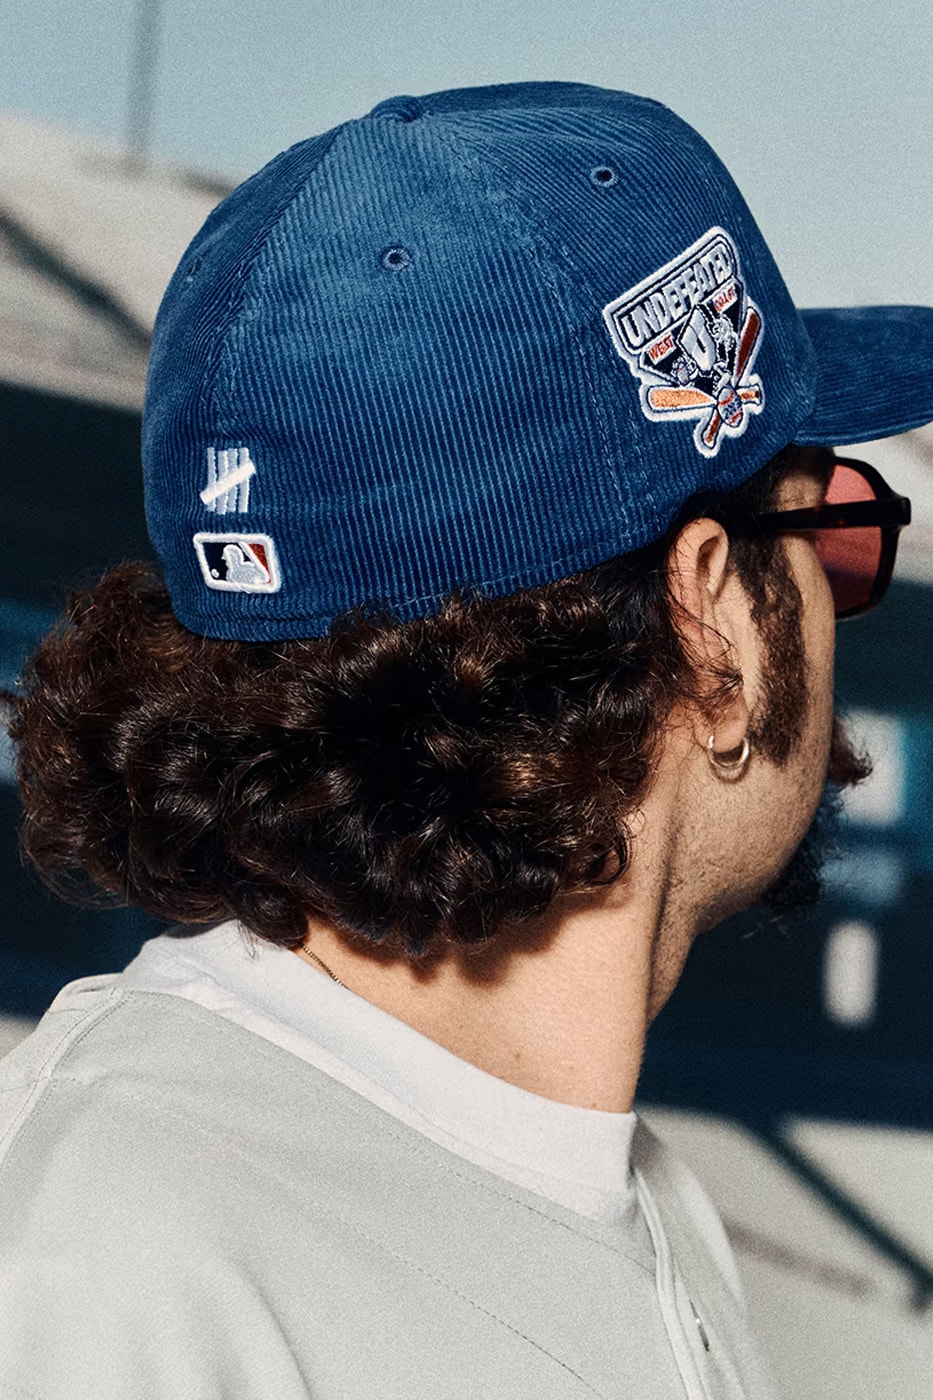 UNDEFEATED x Los Angeles Dodgers Come Together for a New Era 59FIFTY Collaborative Capsule collab collaboration baseball hats mlb major league baseball cap corduroy